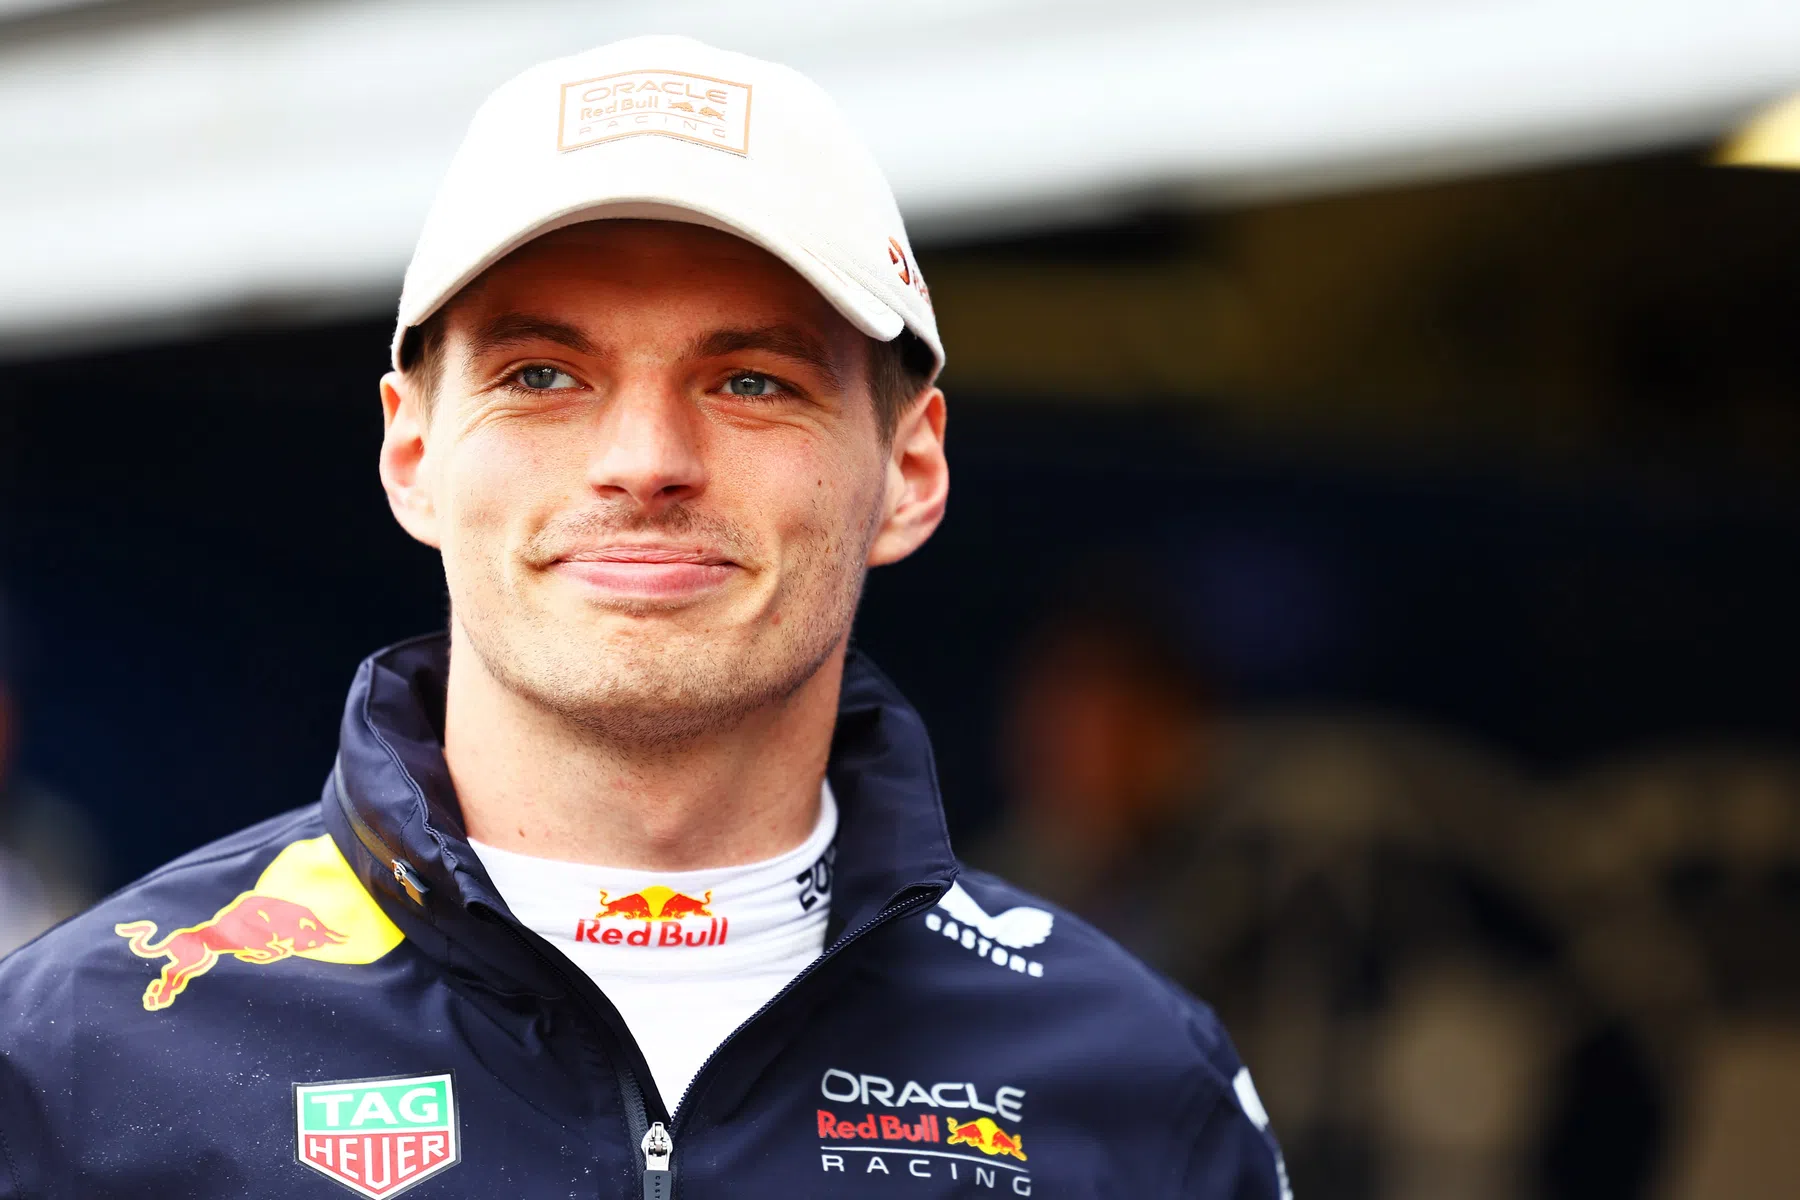 Verstappen will stay at Red Bull Racing and slams Mercedes' advances